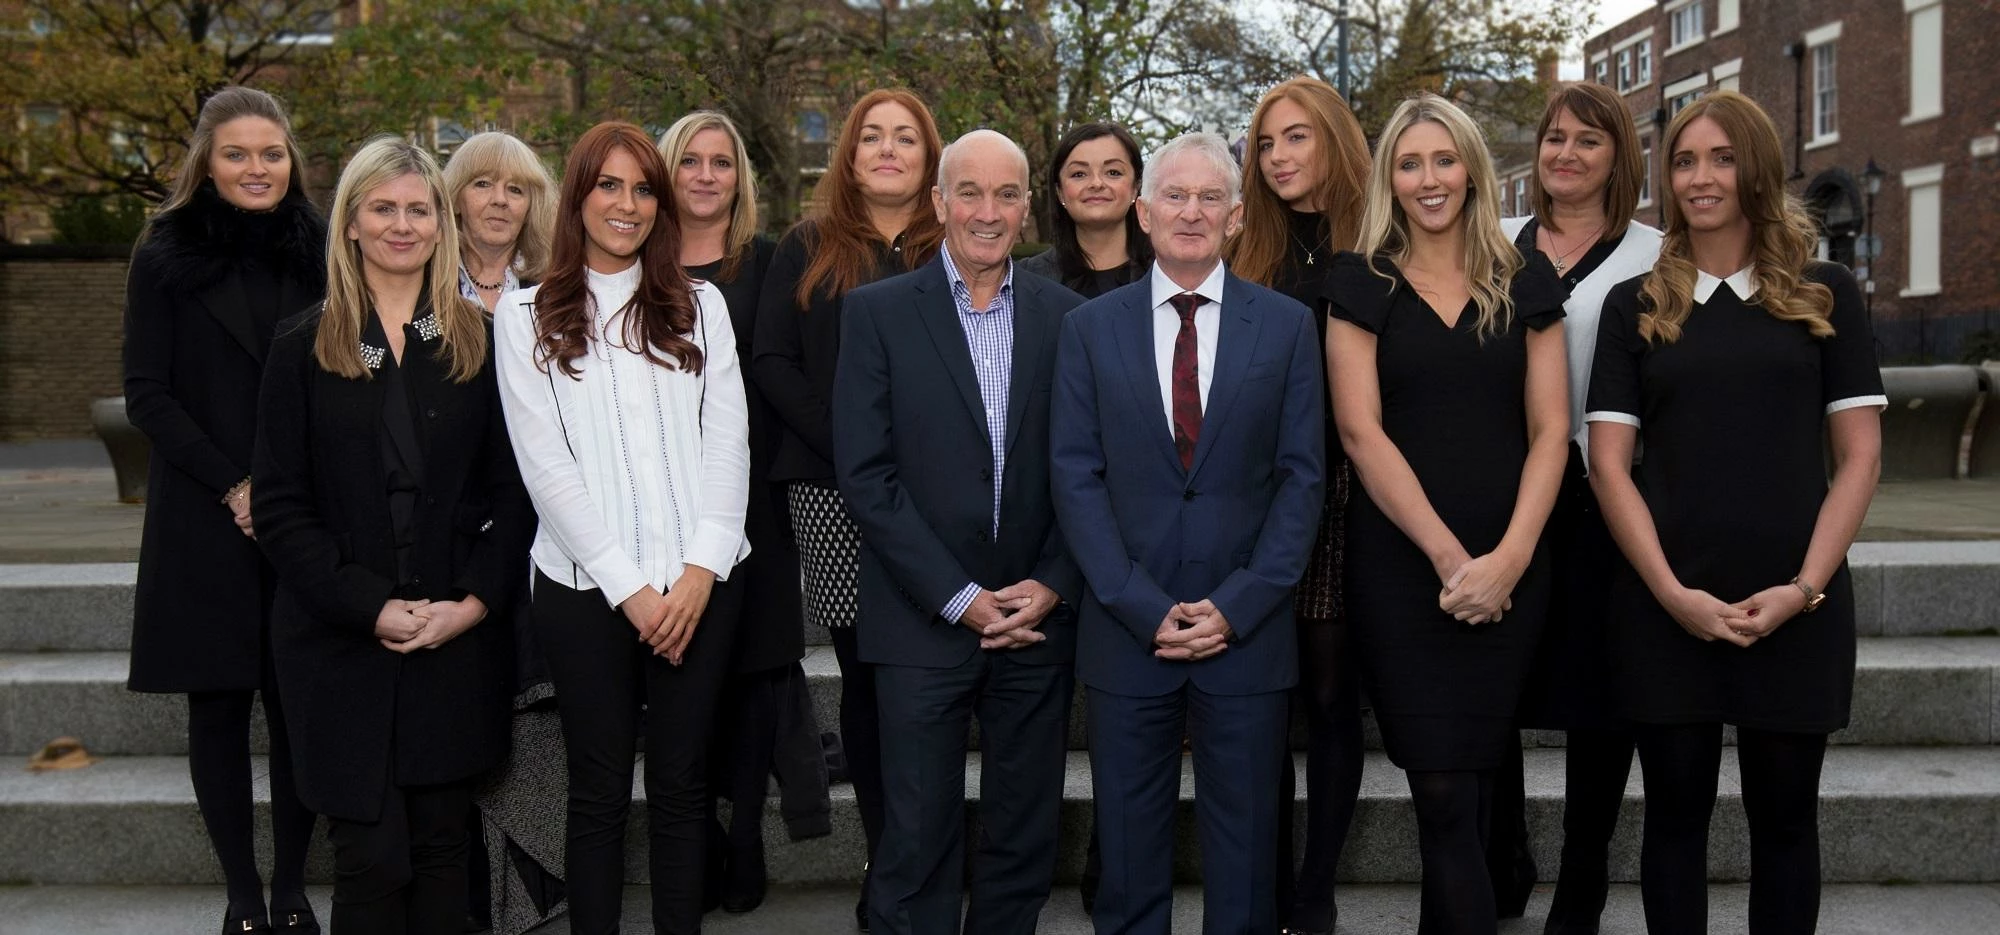 The residential conveyancing team at Paul Crowley & Co